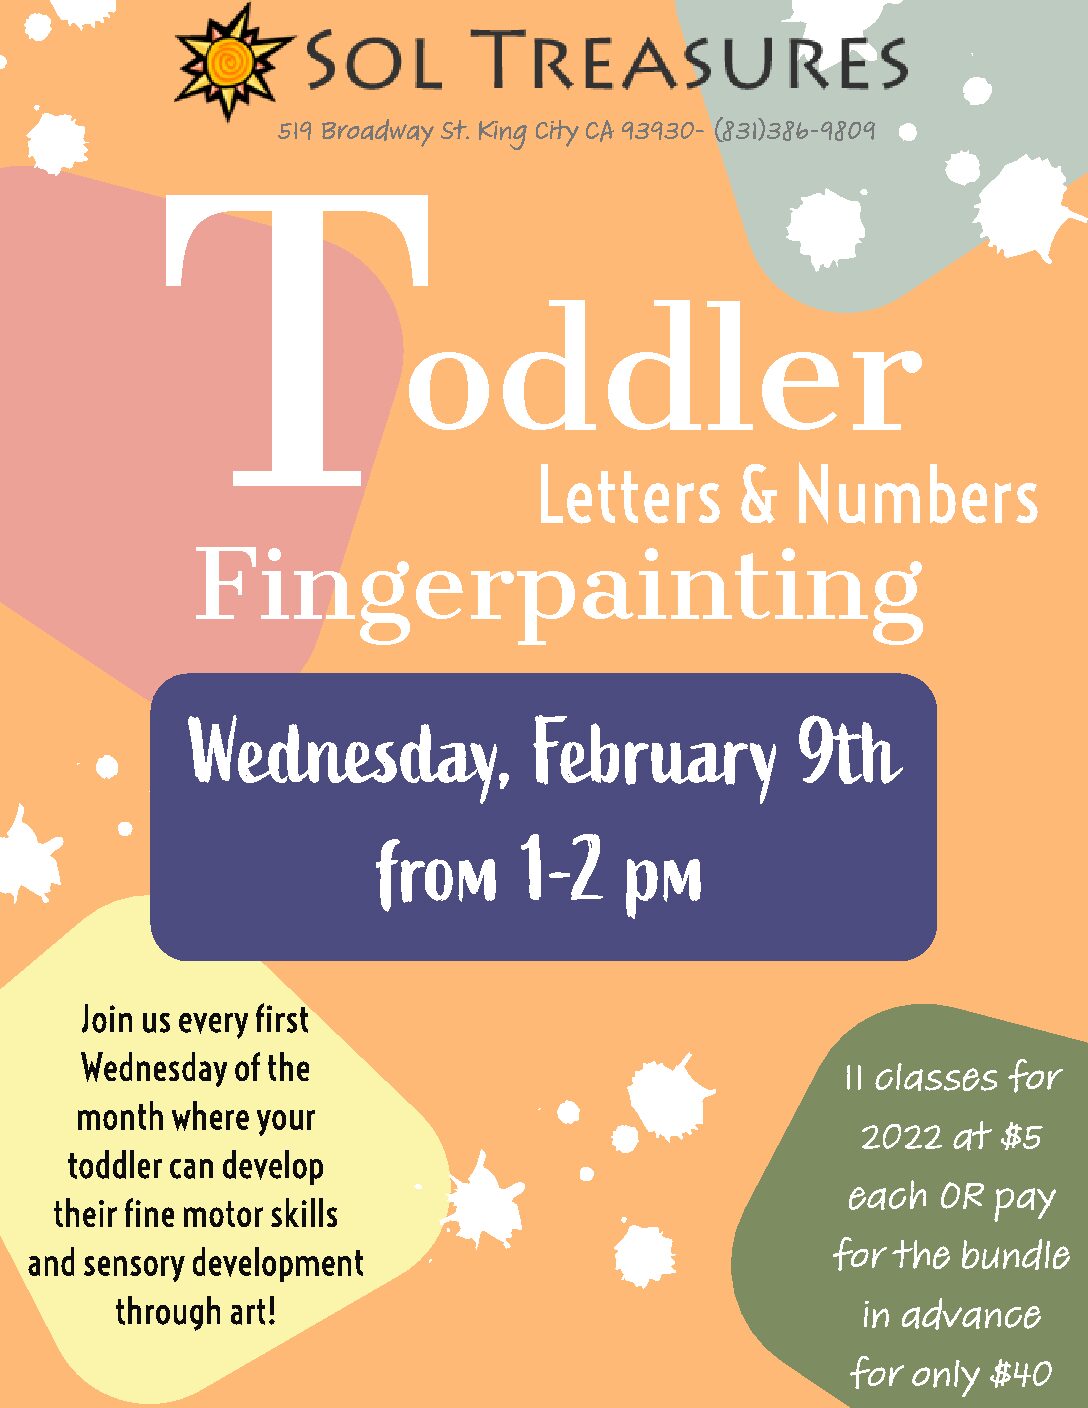 Toddler Letters & Numbers Fingerpainting Class